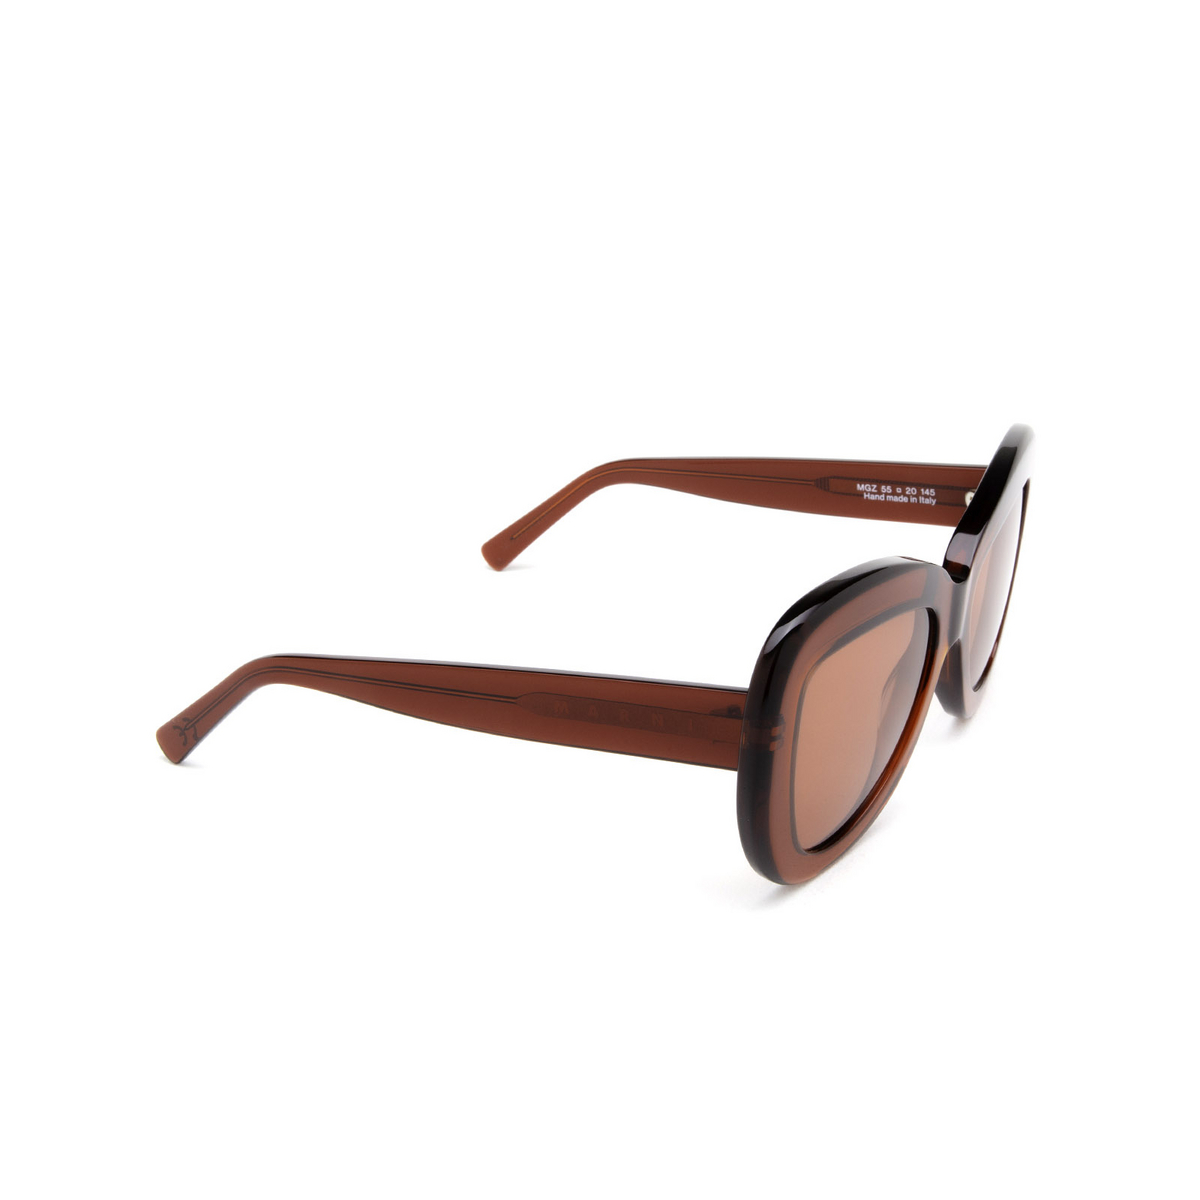 Marni® Butterfly Sunglasses: Elephant Island color Crystal Bordeaux Mgz - three-quarters view.